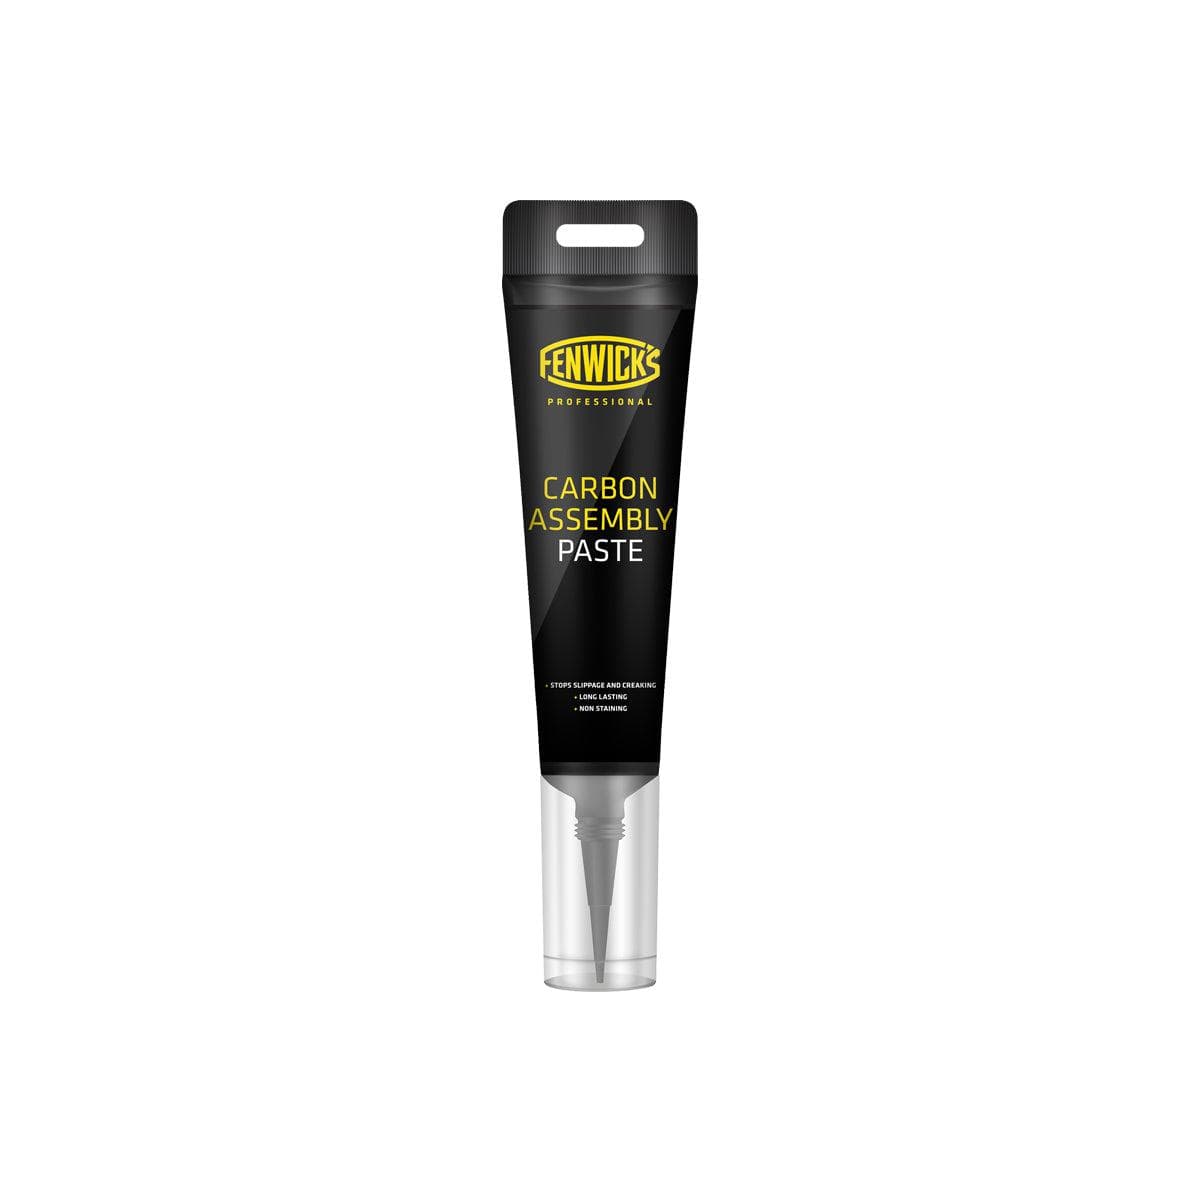 Fenwick'S Professional Carbon Assembly Paste 80Ml Tube: Carbon 80Ml